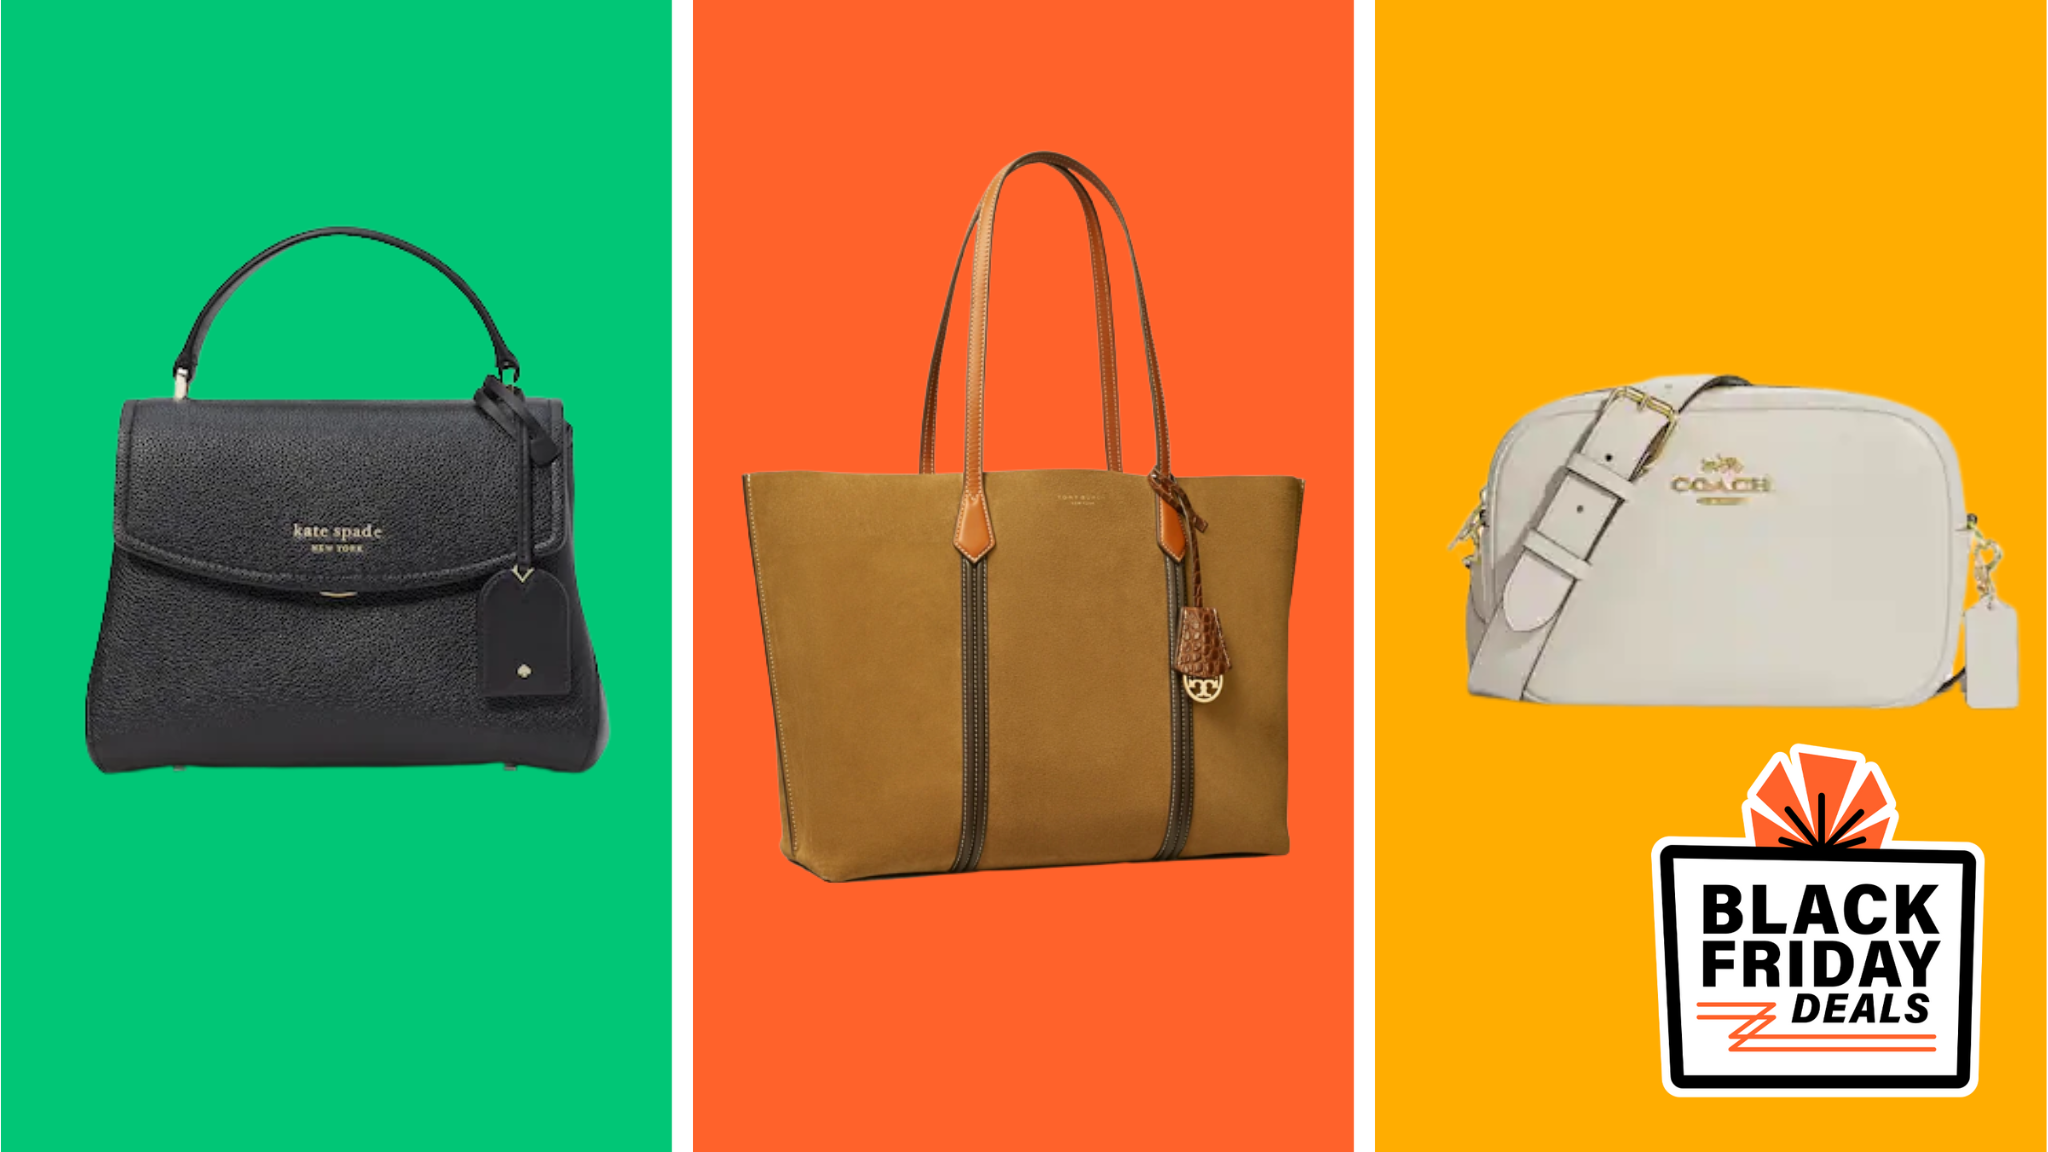 Black Friday deals on Coach, Tory Burch and Kate Spade are live